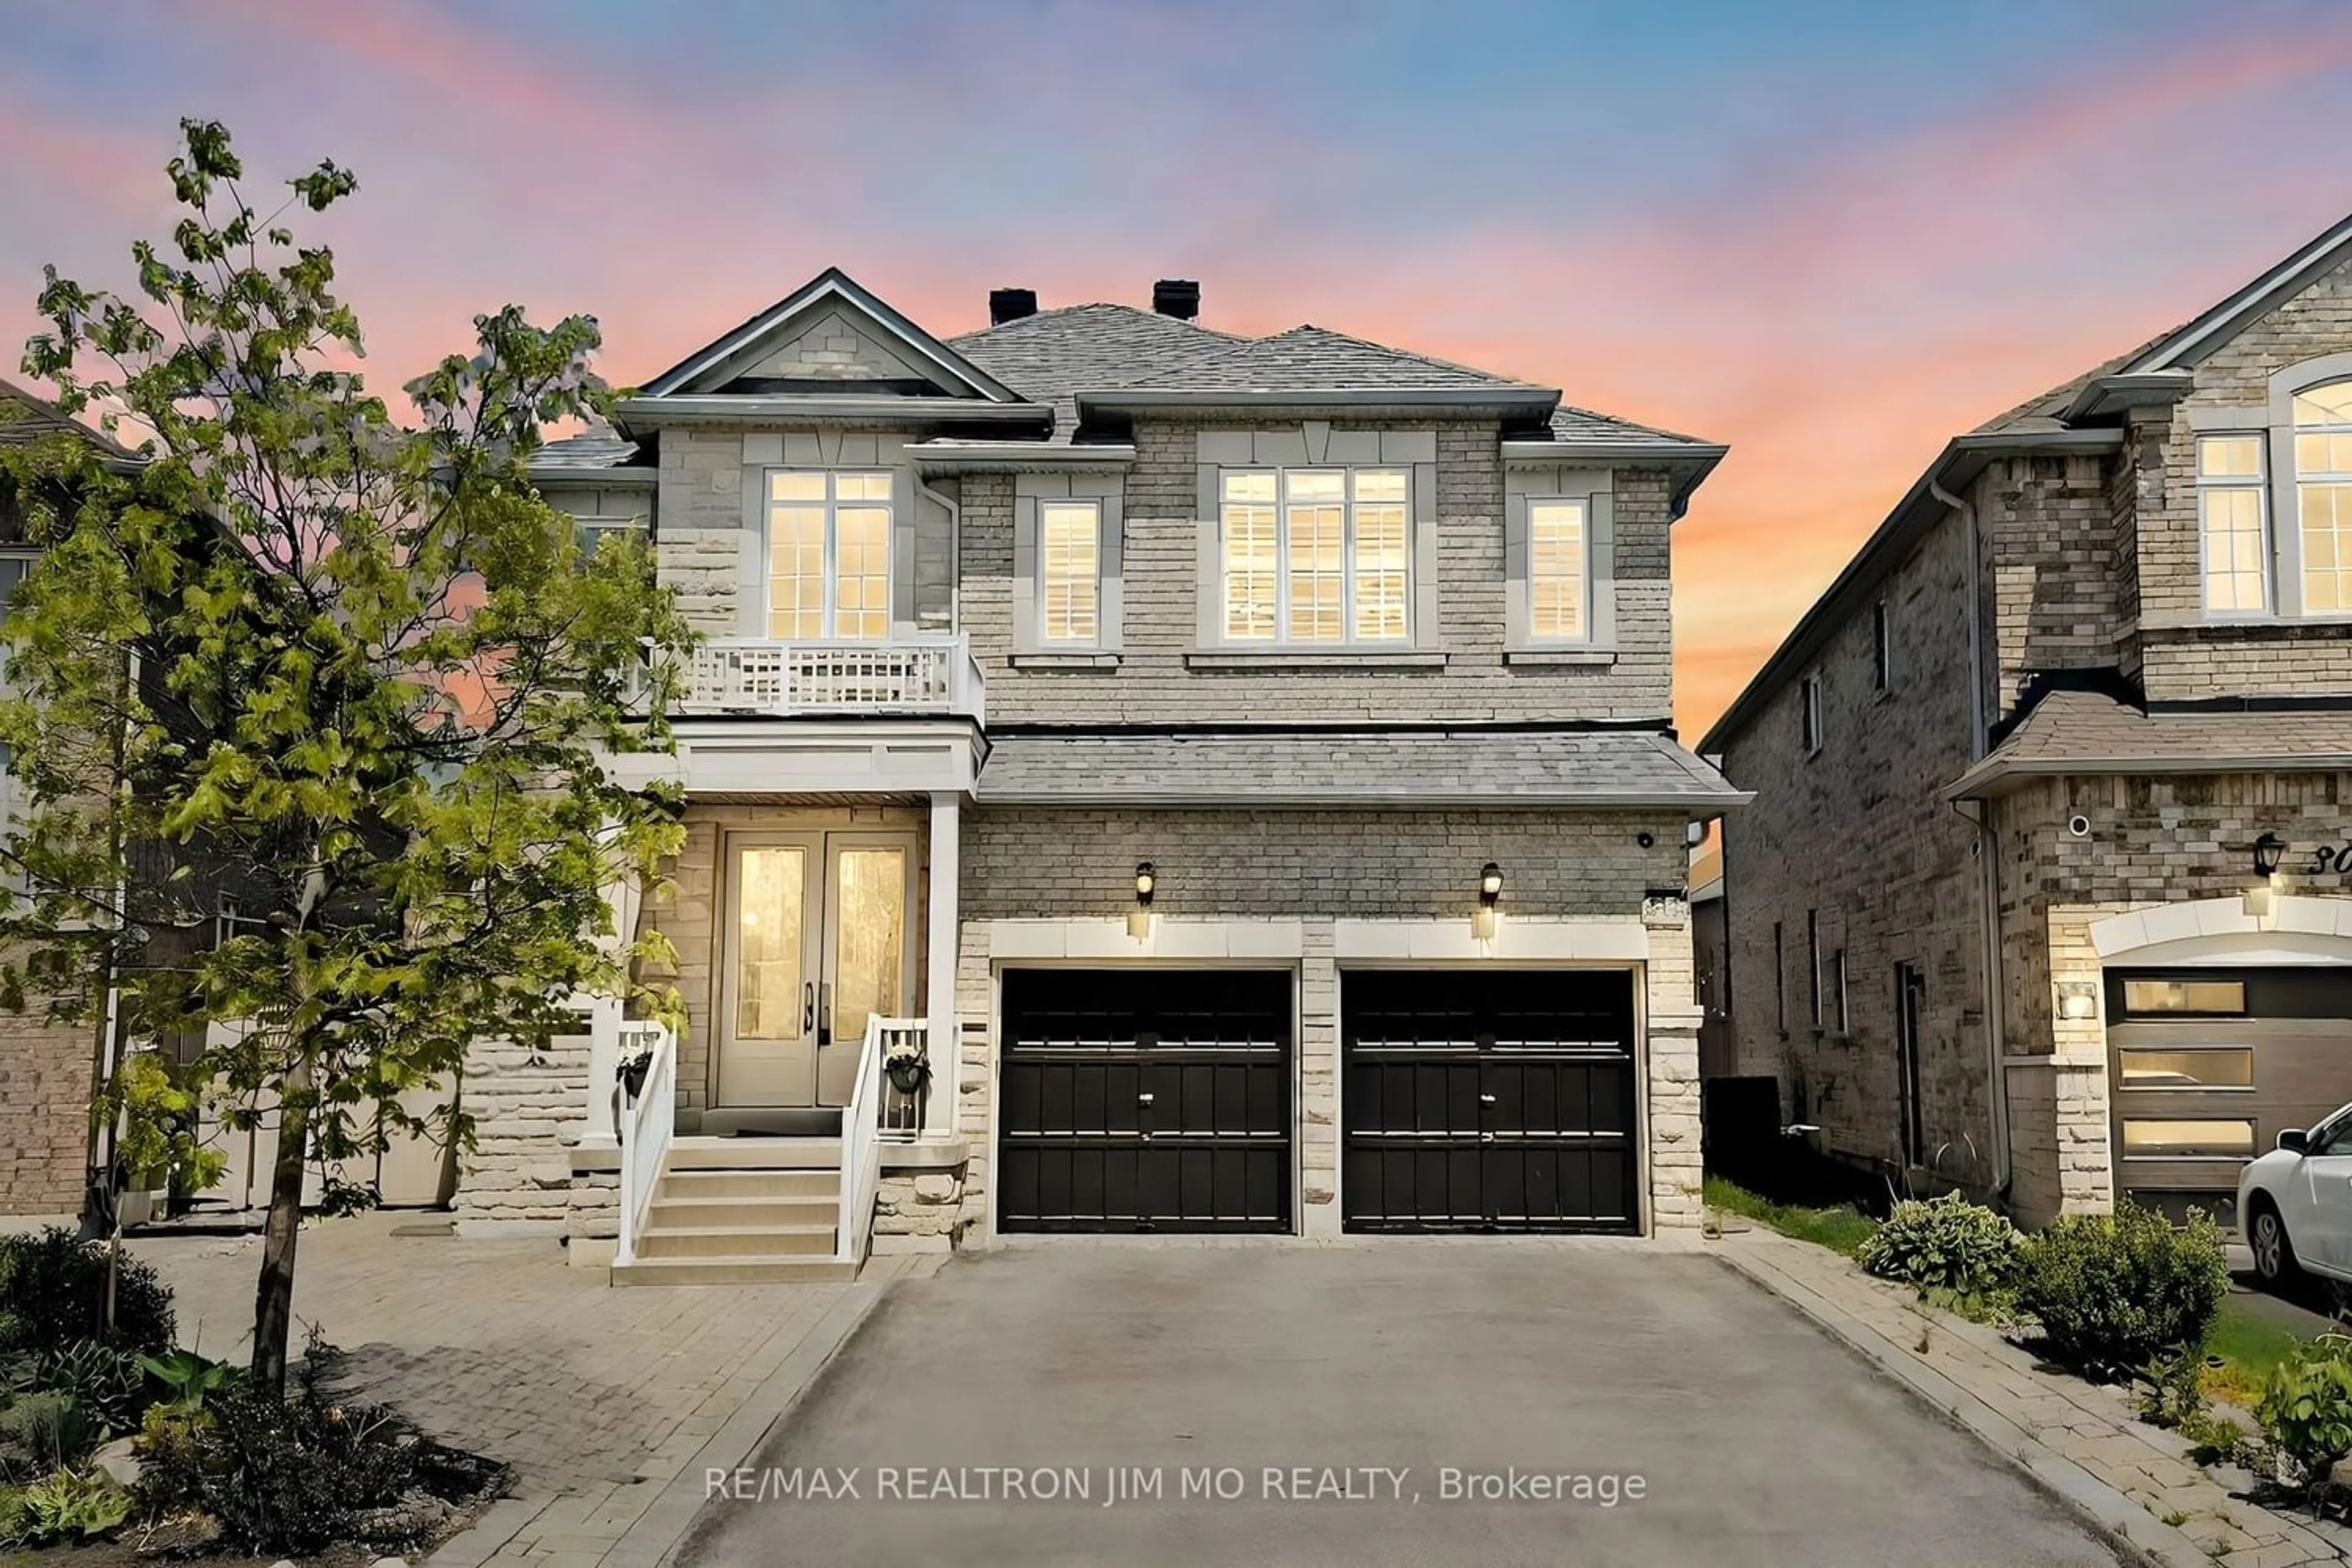 Home with brick exterior material for 28 Sanders Dr, Markham Ontario L6B 0M3